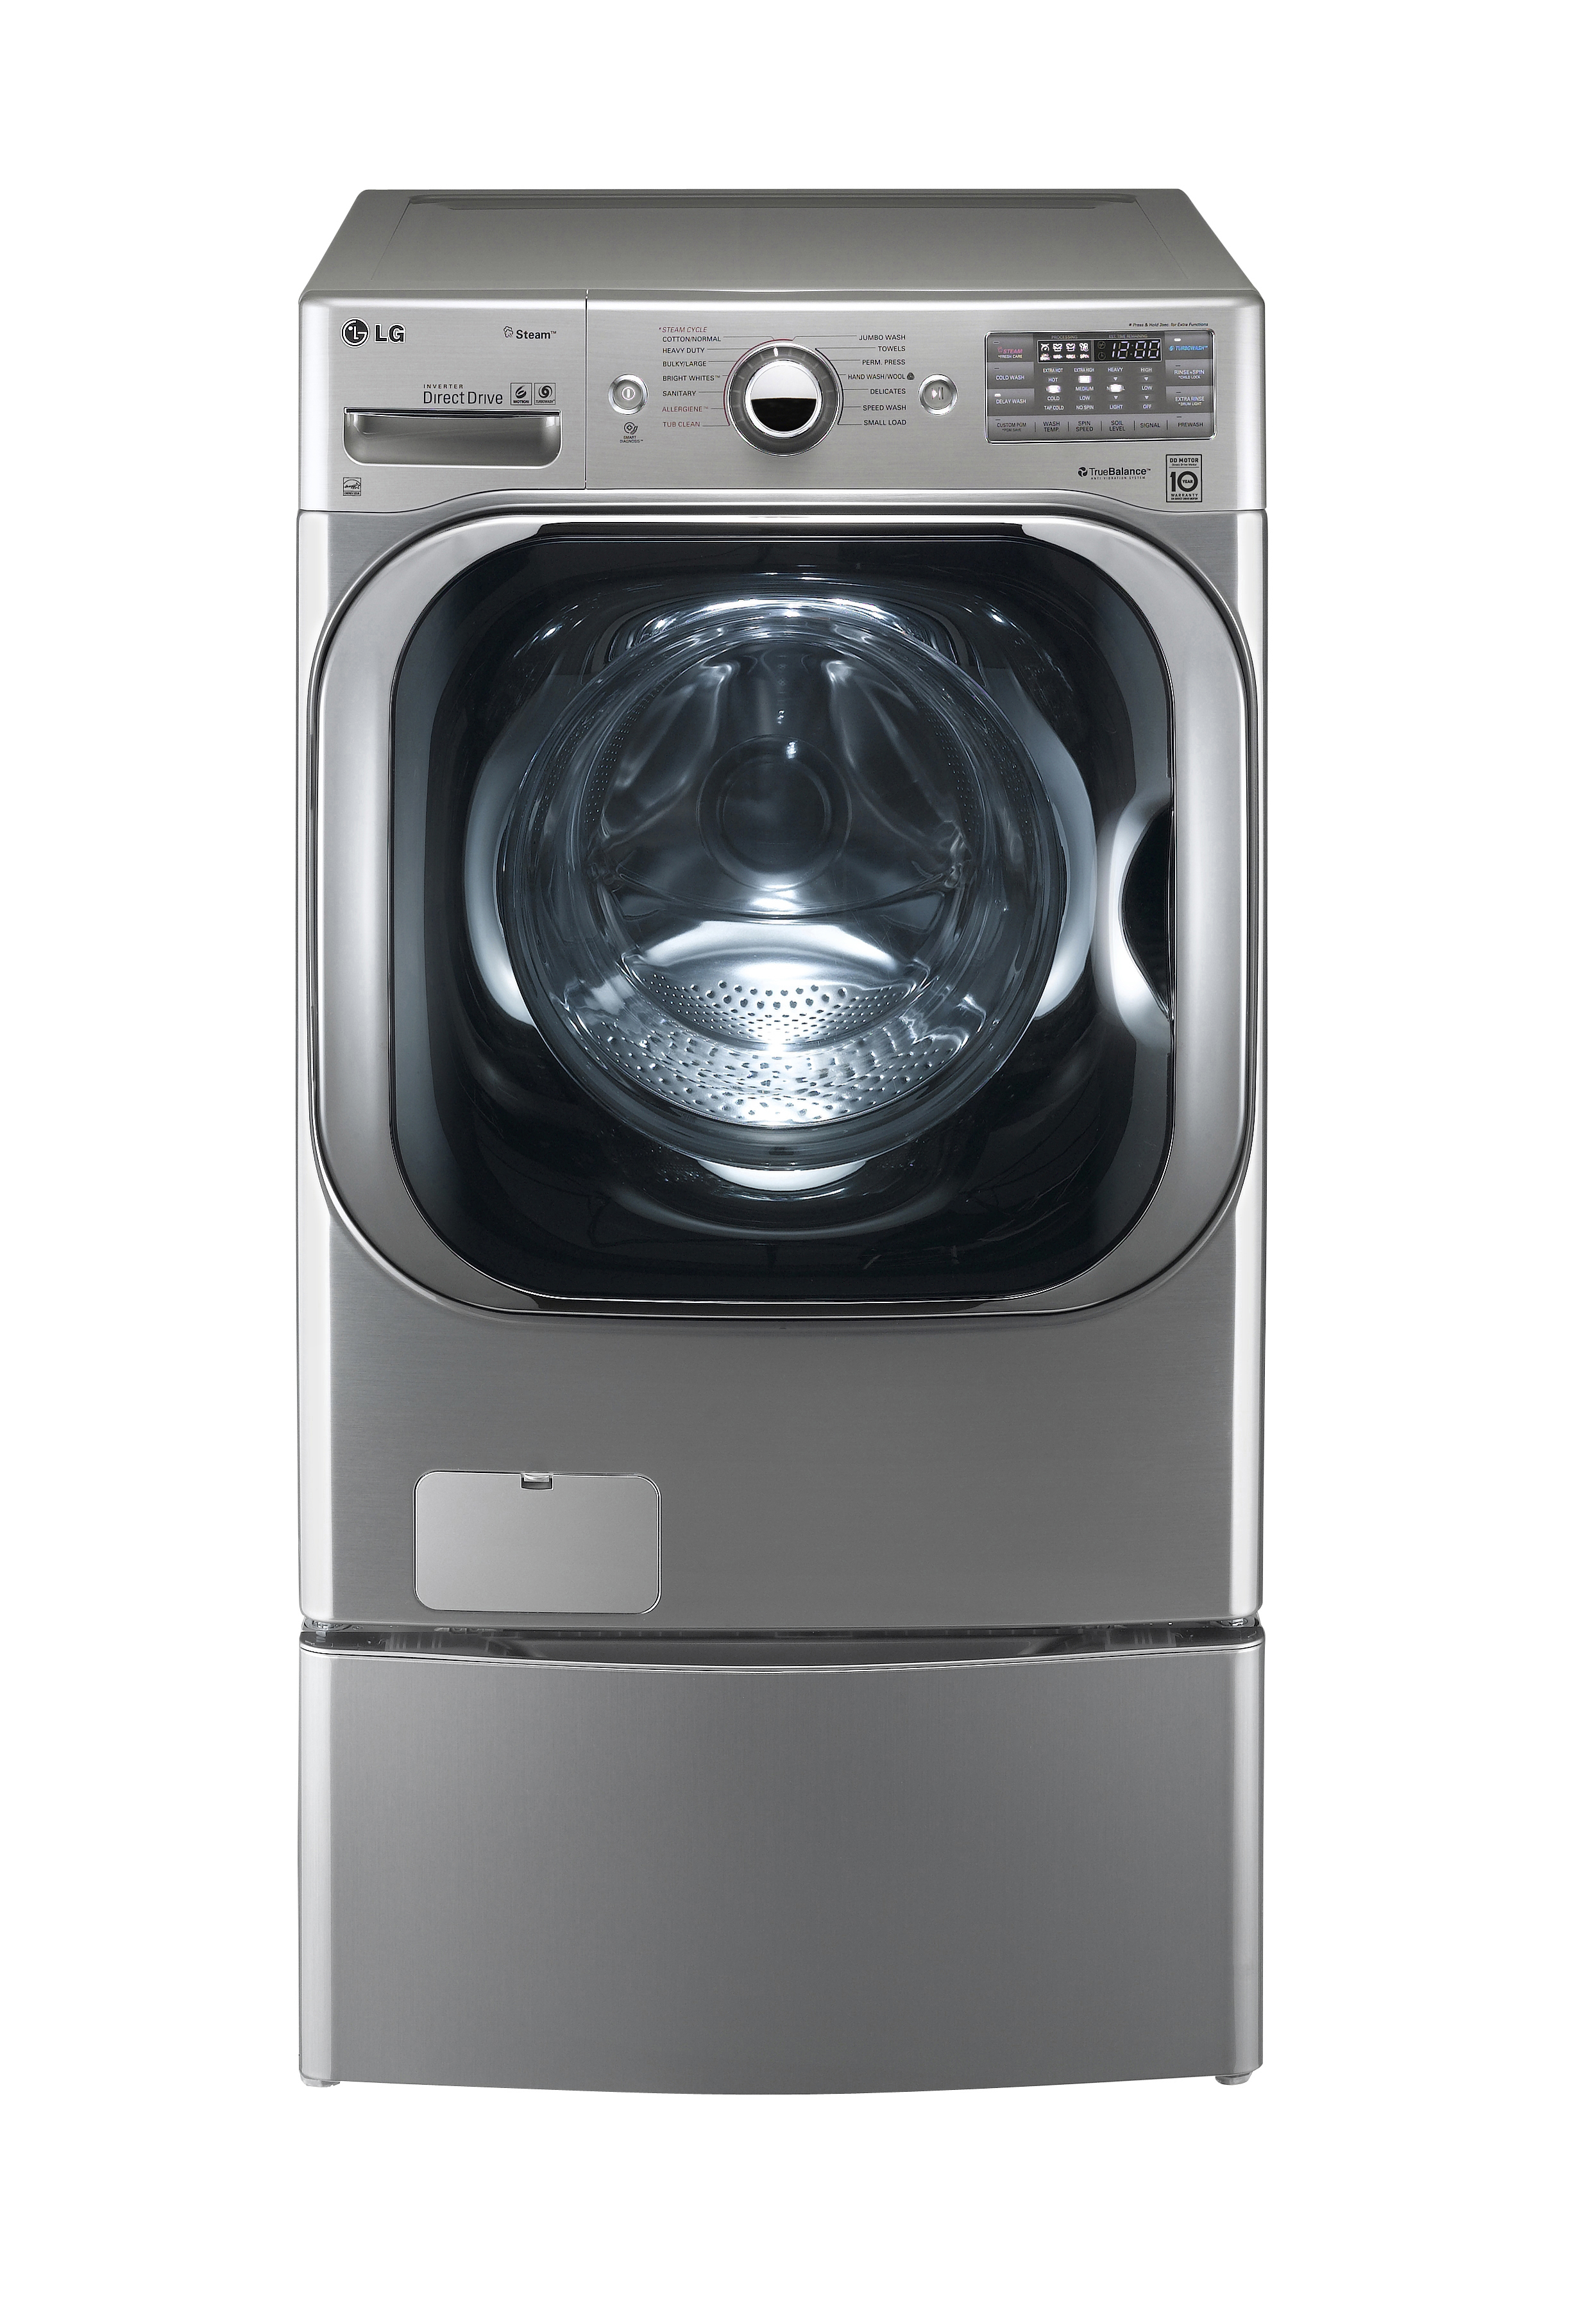 Front view of the LG front-load smart washing machine